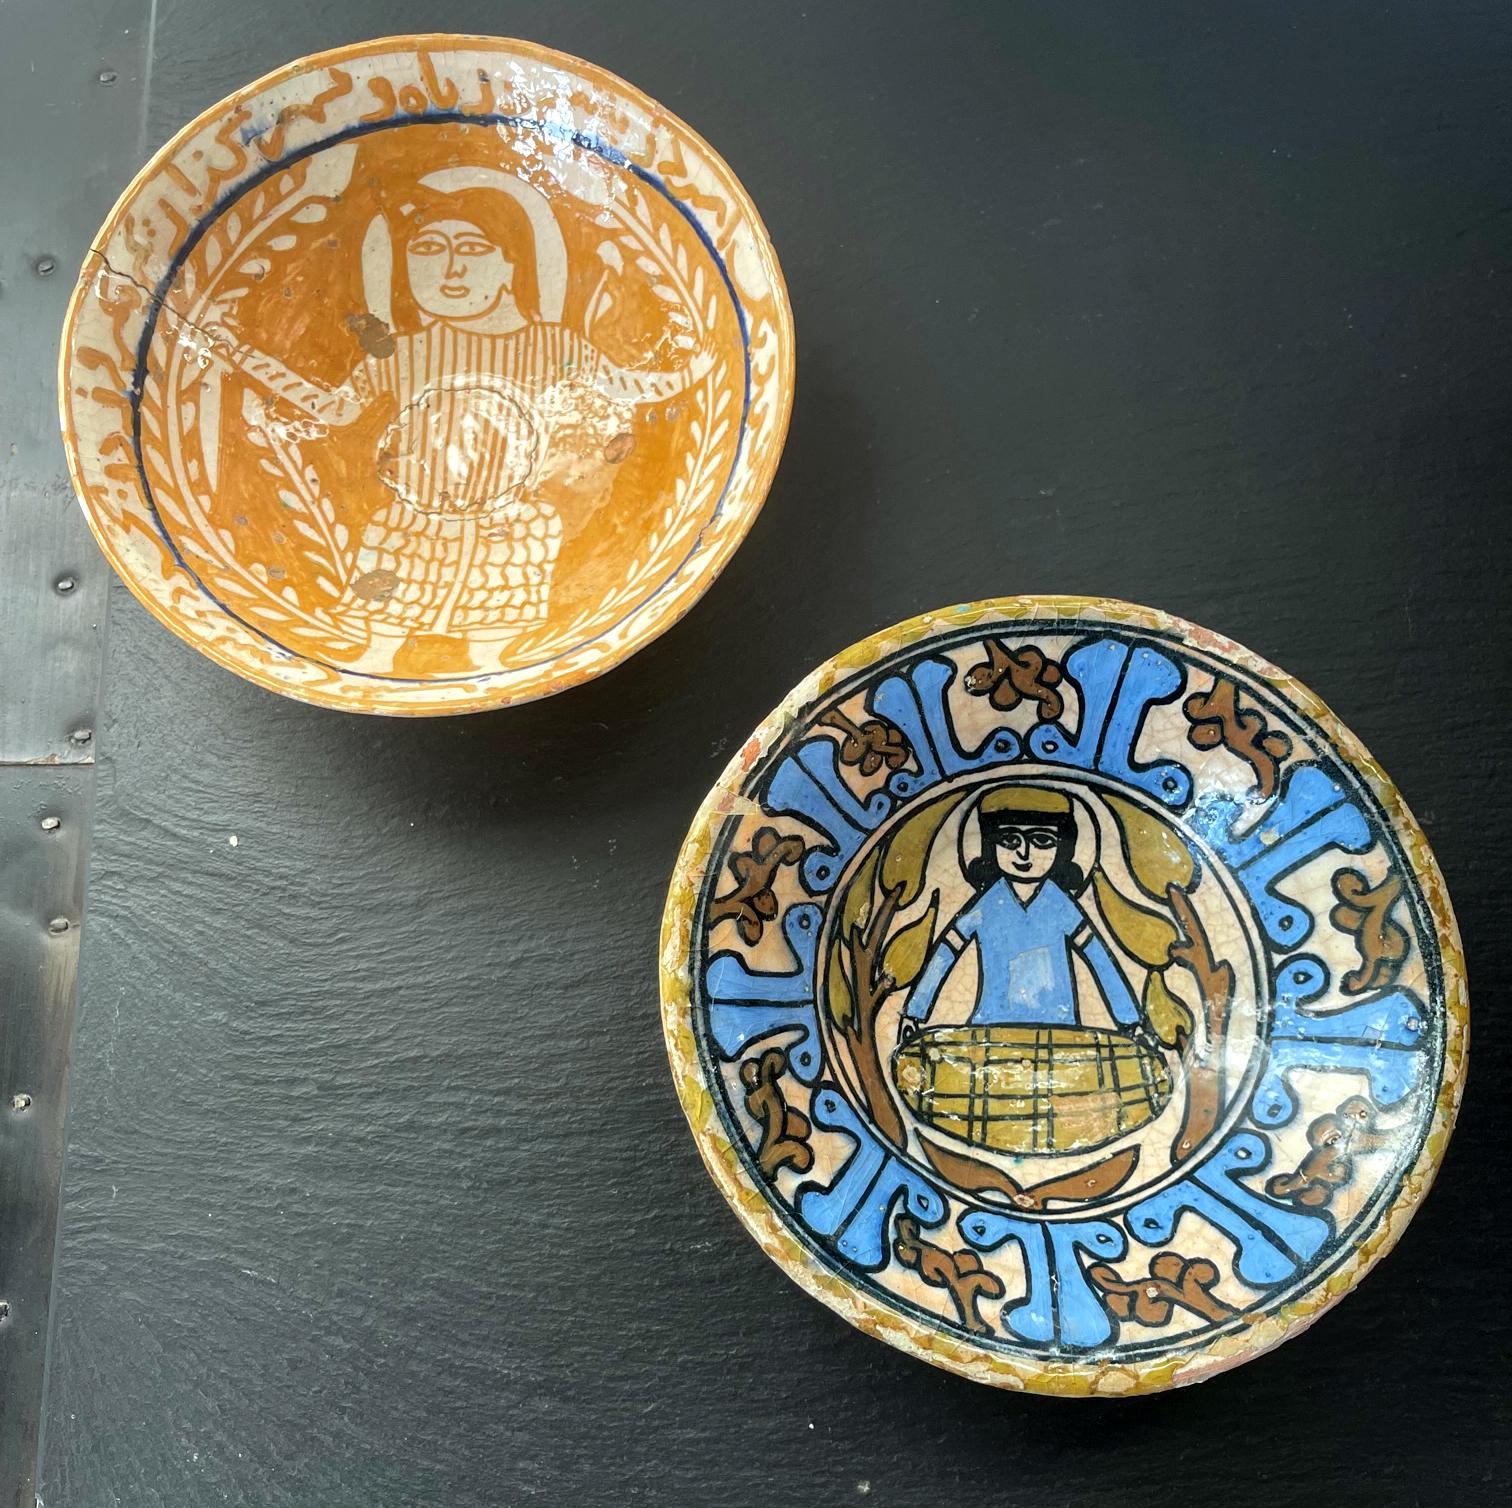 A collection of two small pottery bowls with polychrome central figurative decorations, matching size and similar conical form. These bowls are identified as Nishapur ware circa 10th century (in nowadays Iran). They were stoneware (possibly